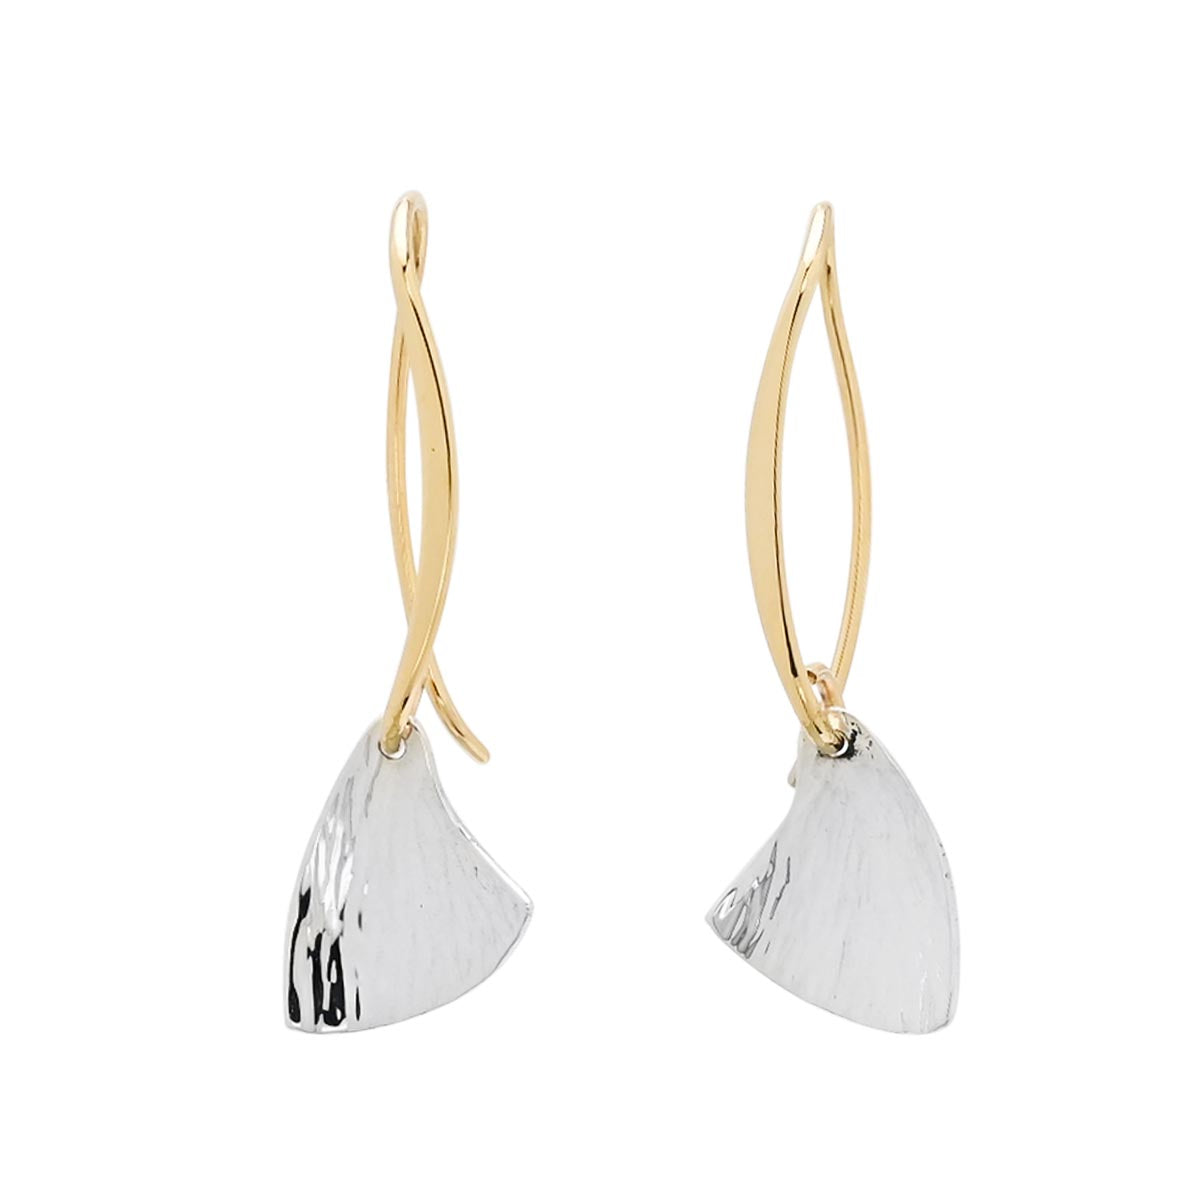 E.L. Designs Shimmer Drop Earrings in Sterling Silver and 14kt Yellow Gold